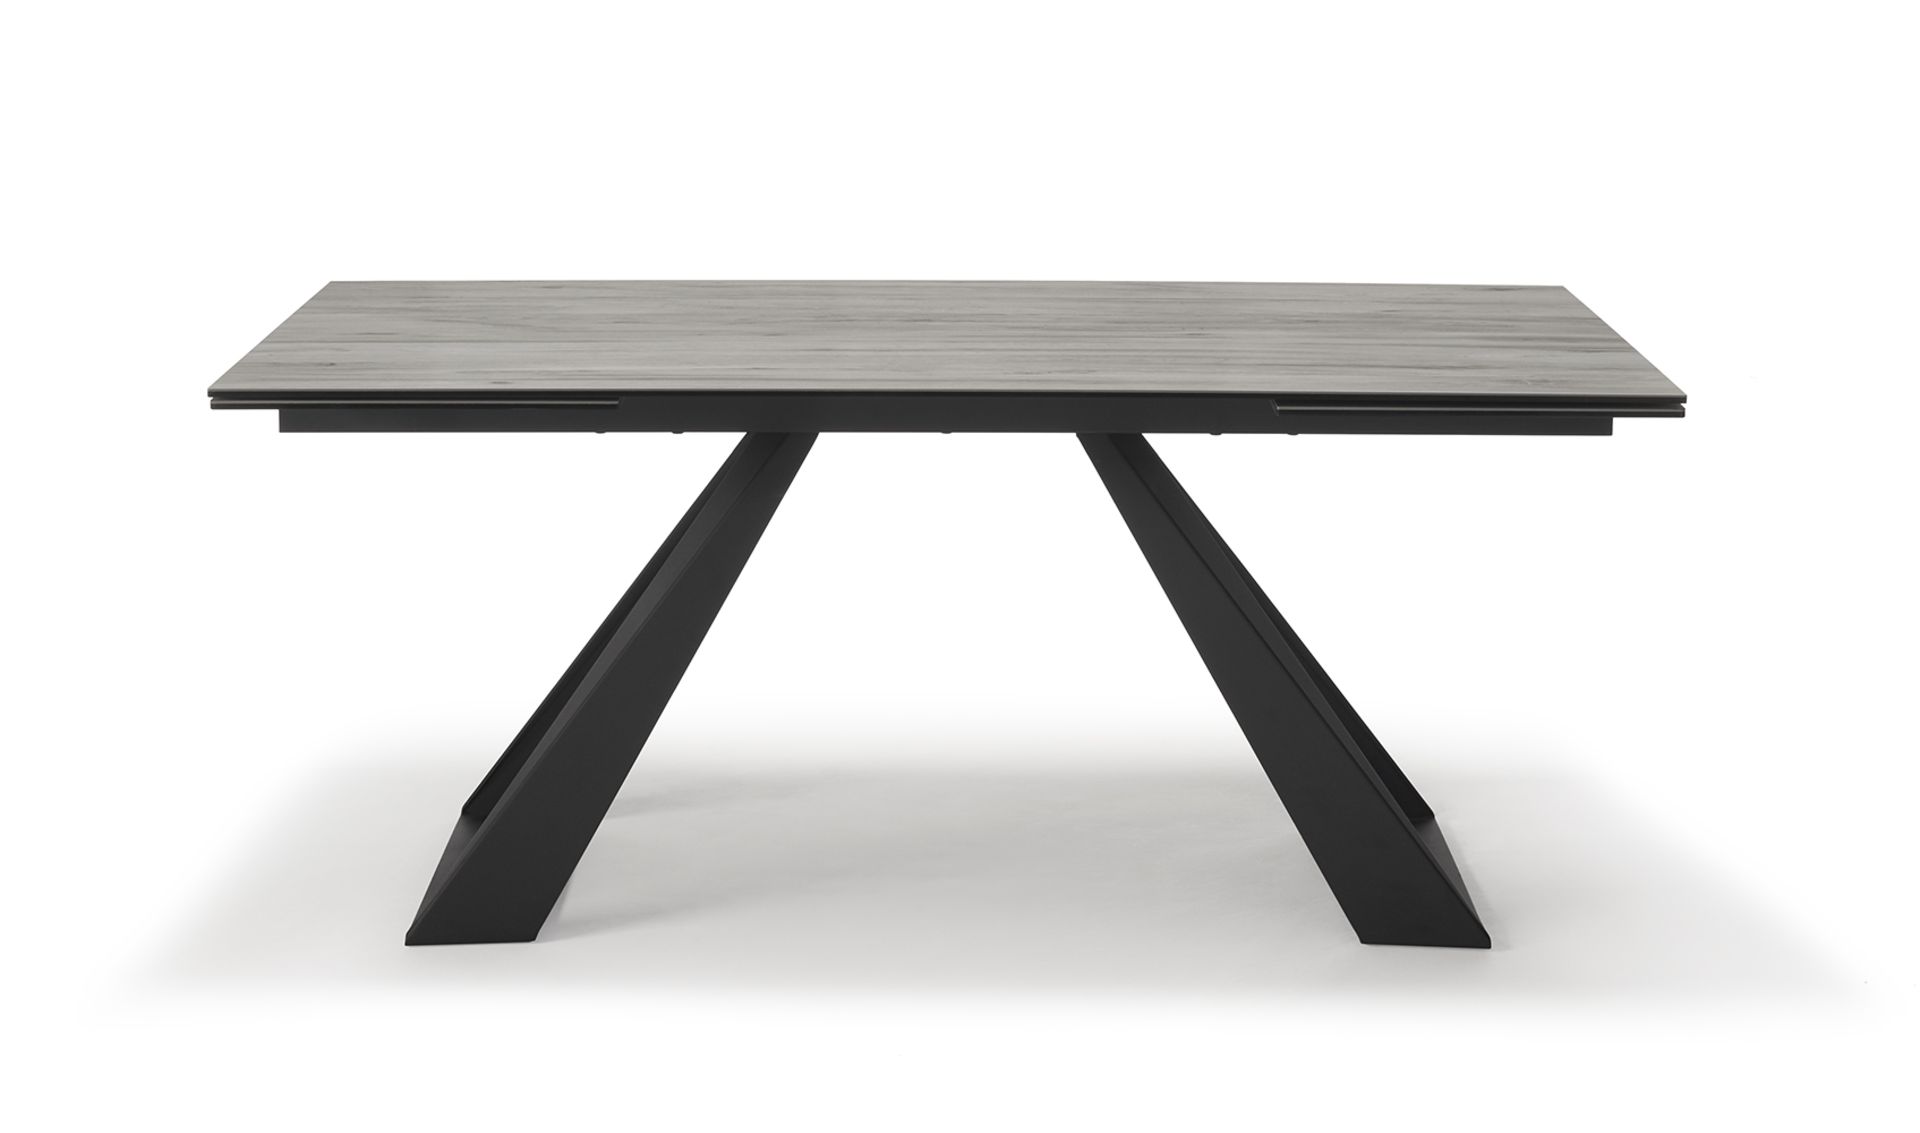 Spartan Dining Table by Kesterport The Spartan Dining Table is part of a sophisticated collection of - Image 4 of 12